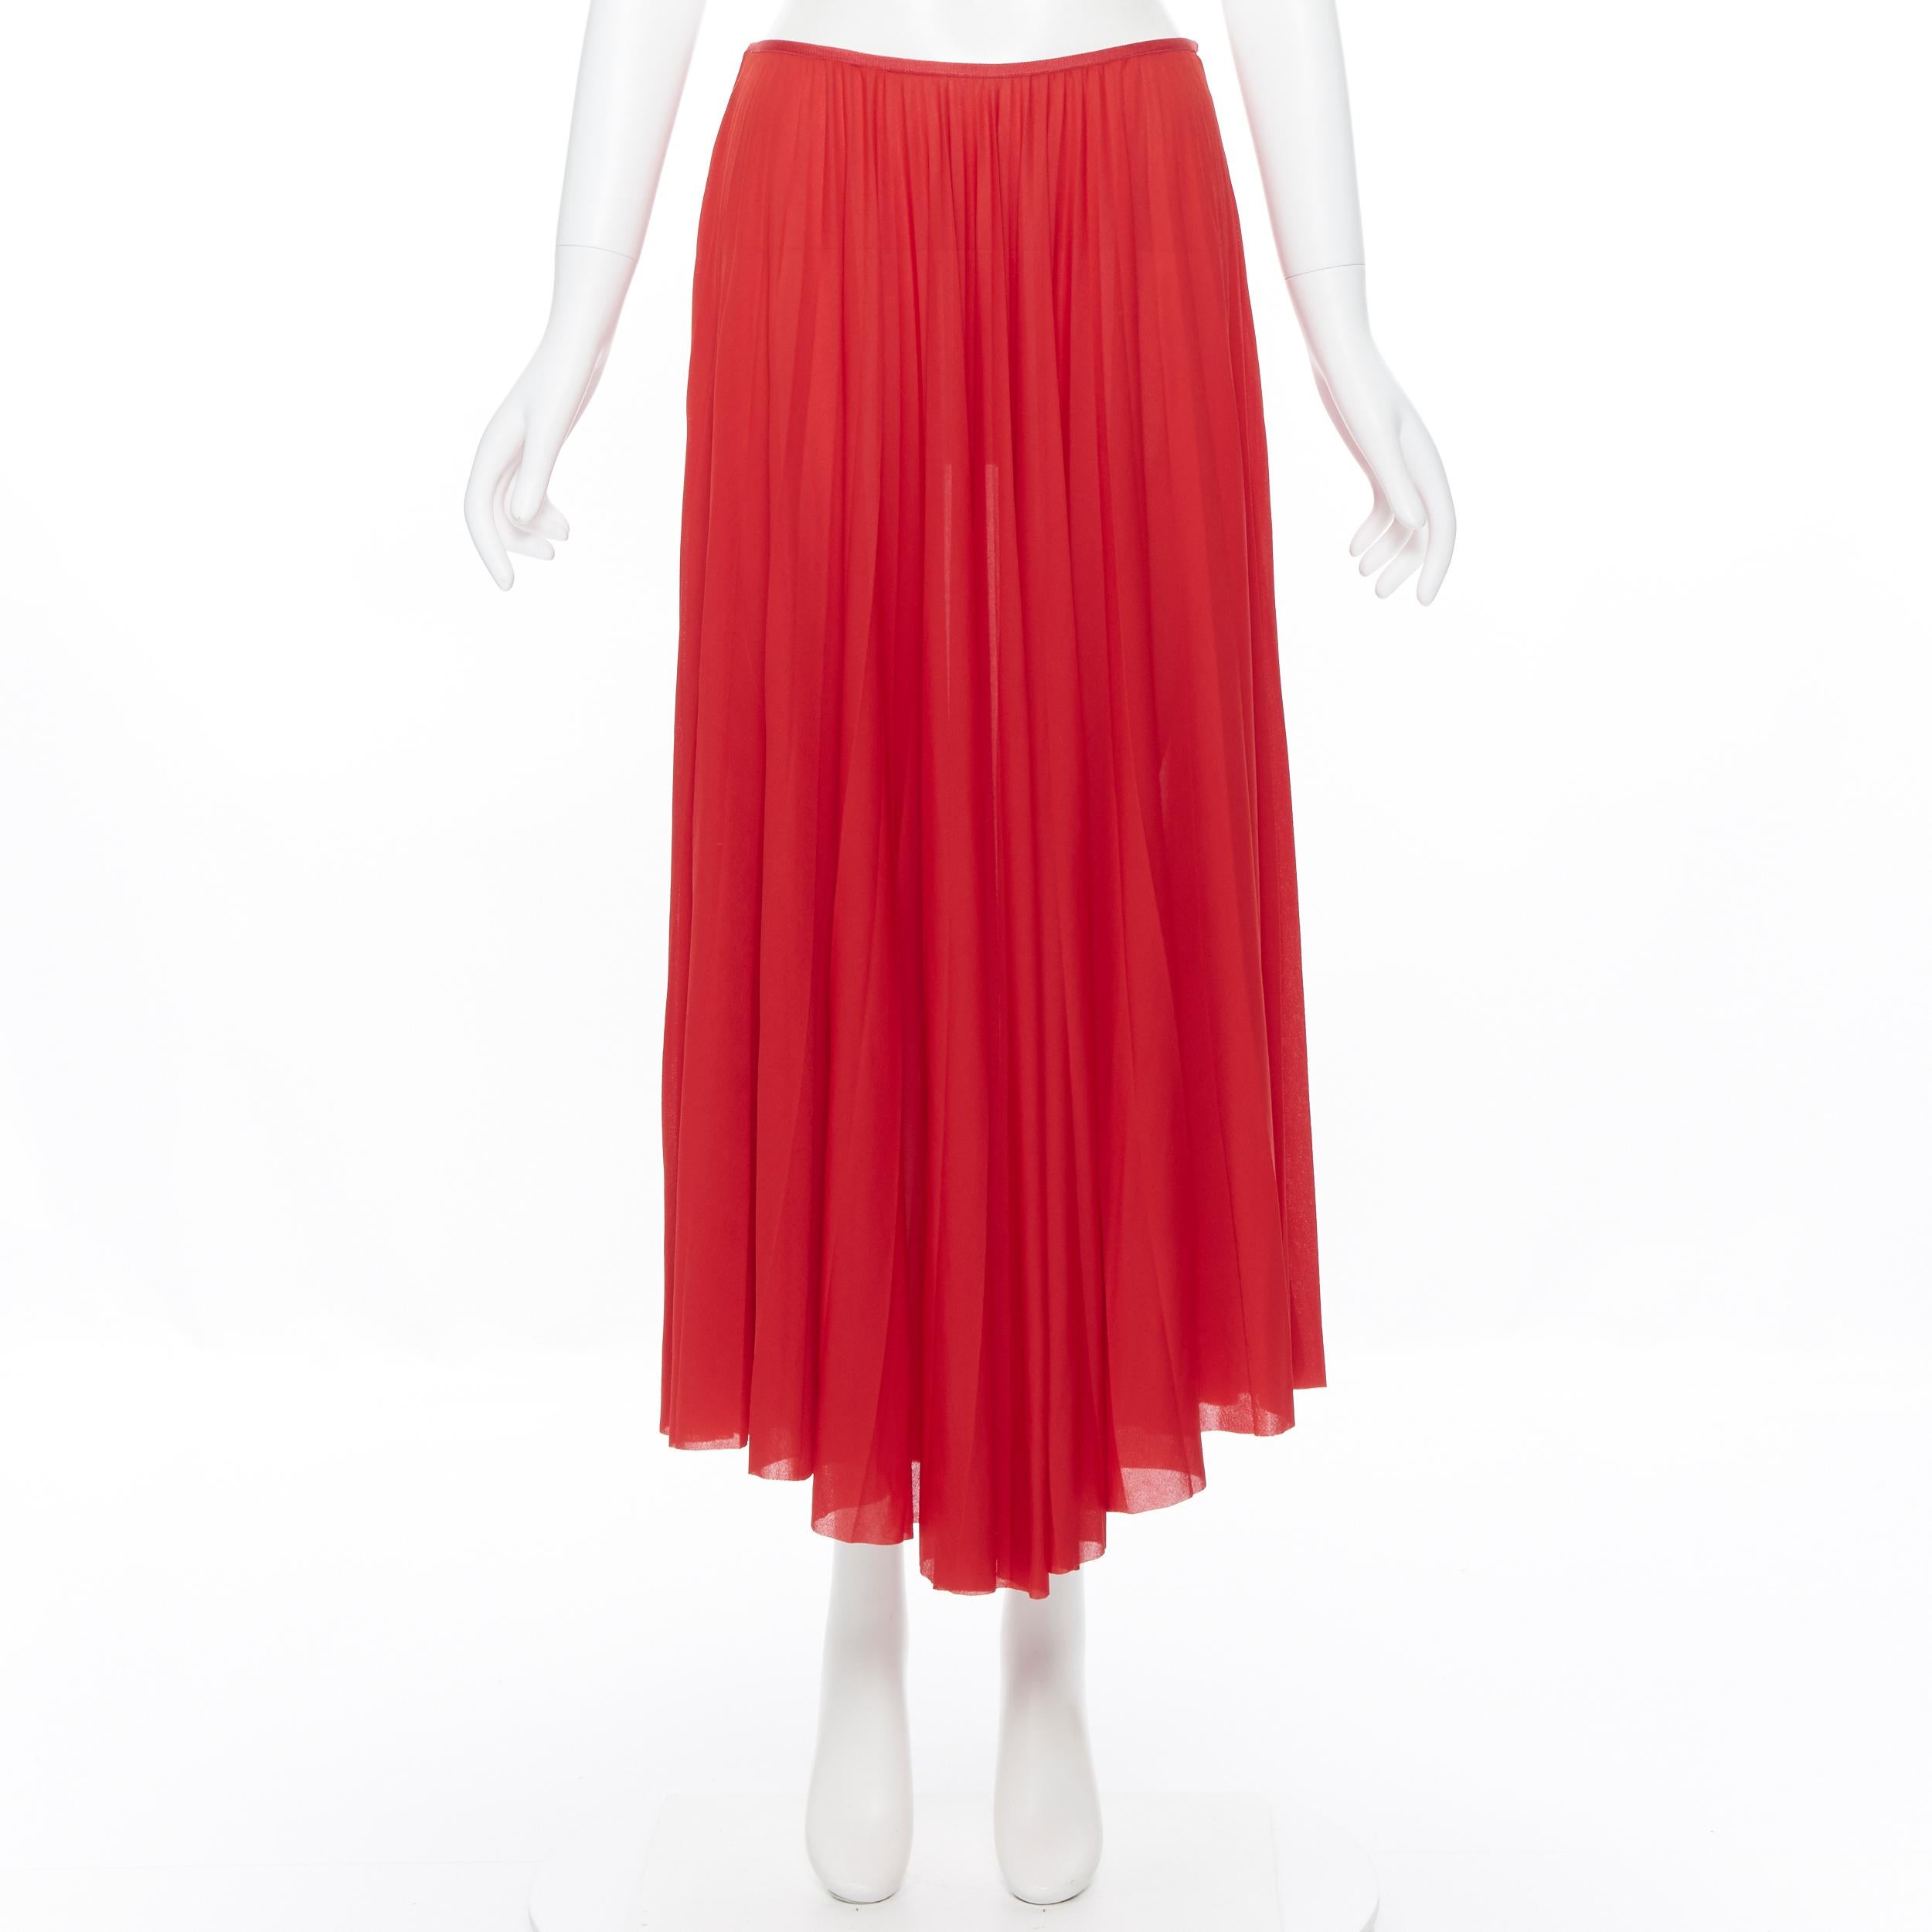 OLD CELINE PHOEBE PHILO 100% polyester poppy red pleated raw cut hem skirt FR36
Brand: Celine
Designer: Phoebe Philo
Model Name / Style: Pleated skirt
Material: Polyester
Color: Red
Pattern: Solid
Closure: Zip
Extra Detail: Stretch fit waist.